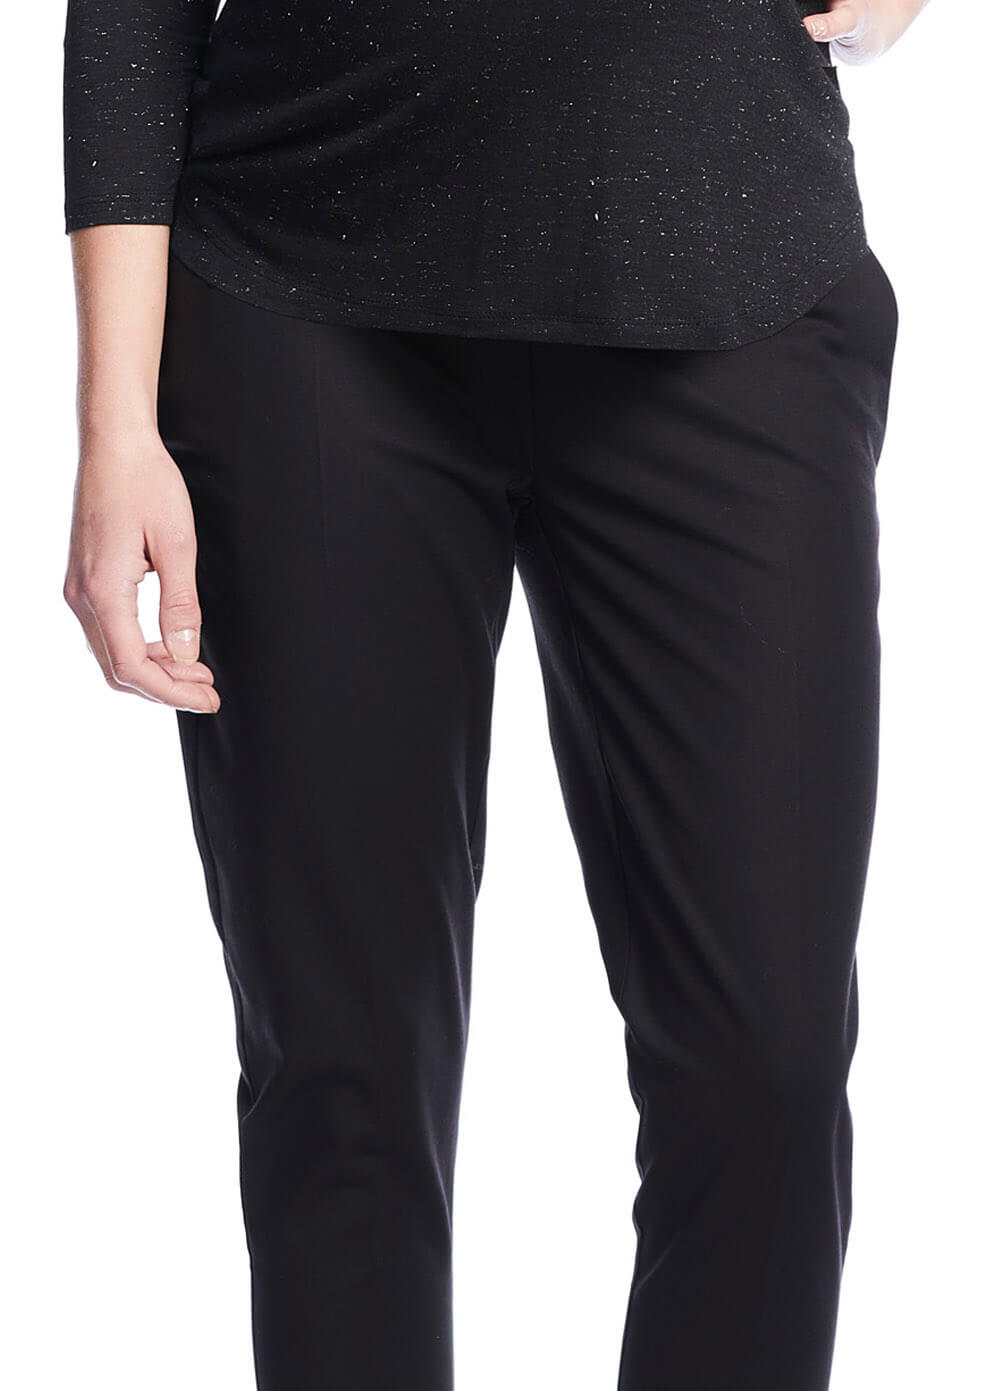 Black Maternity Business Trousers by Queen mum